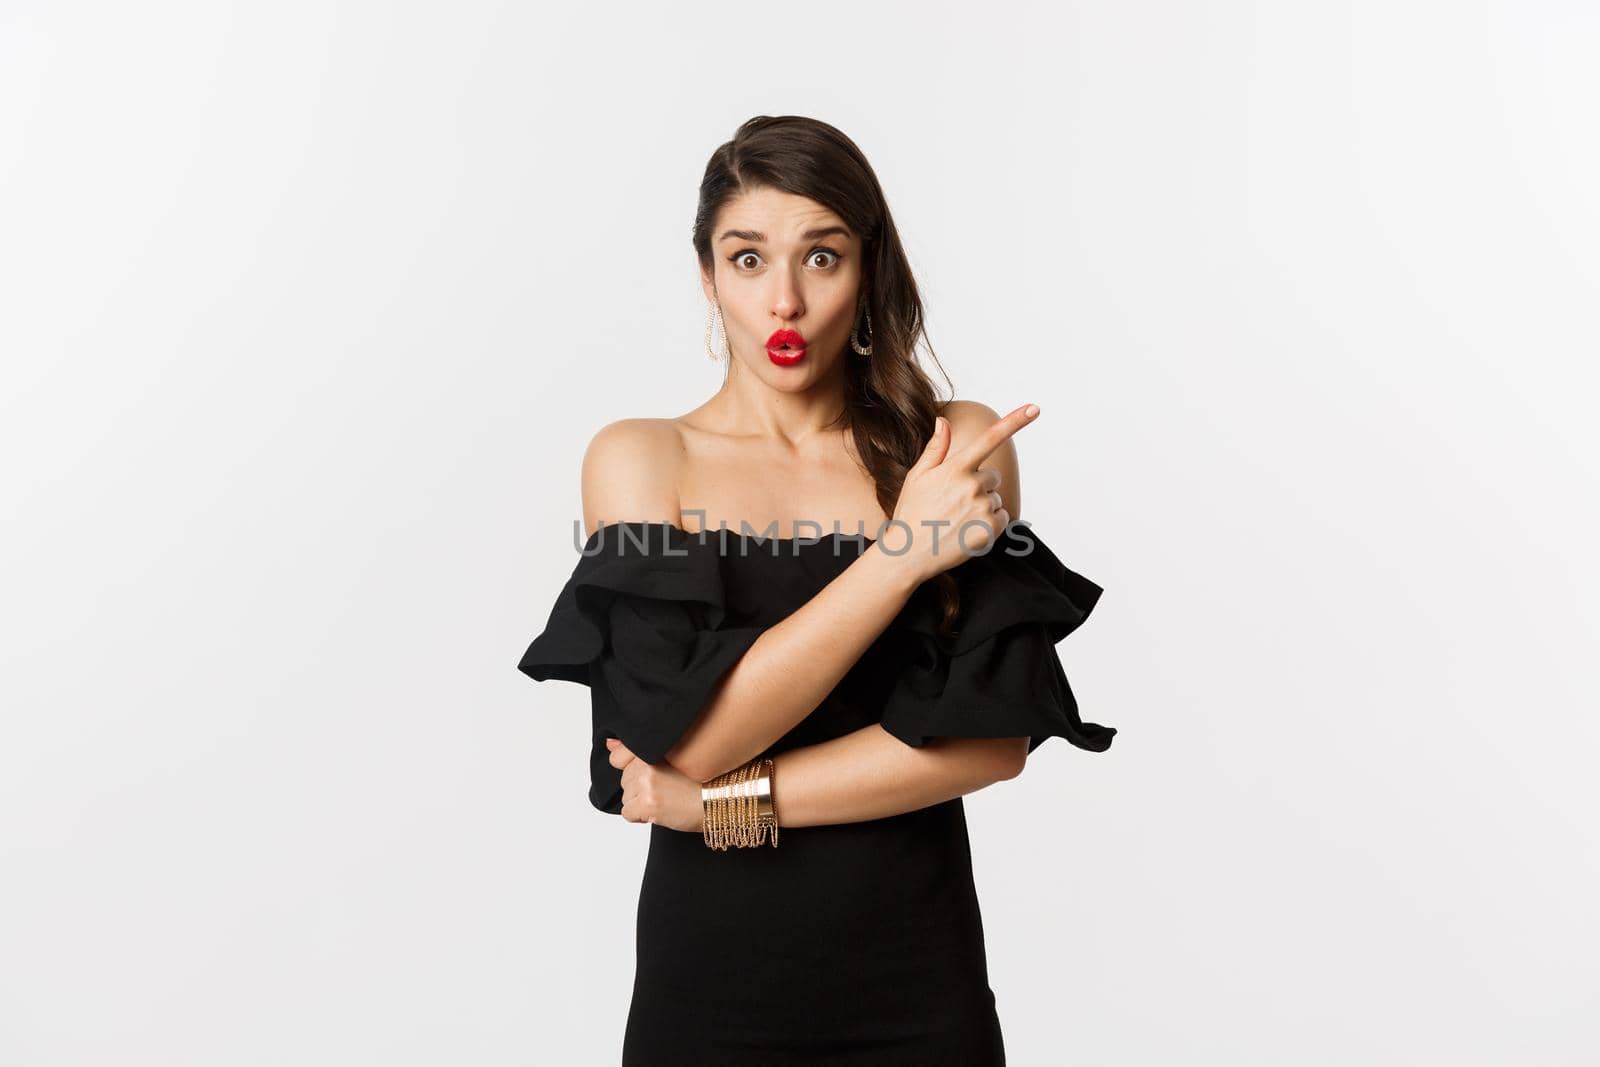 Fashion and beauty. Surprised woman in black dress pointing finger at upper right corner, showing advertisement, standing over white background.